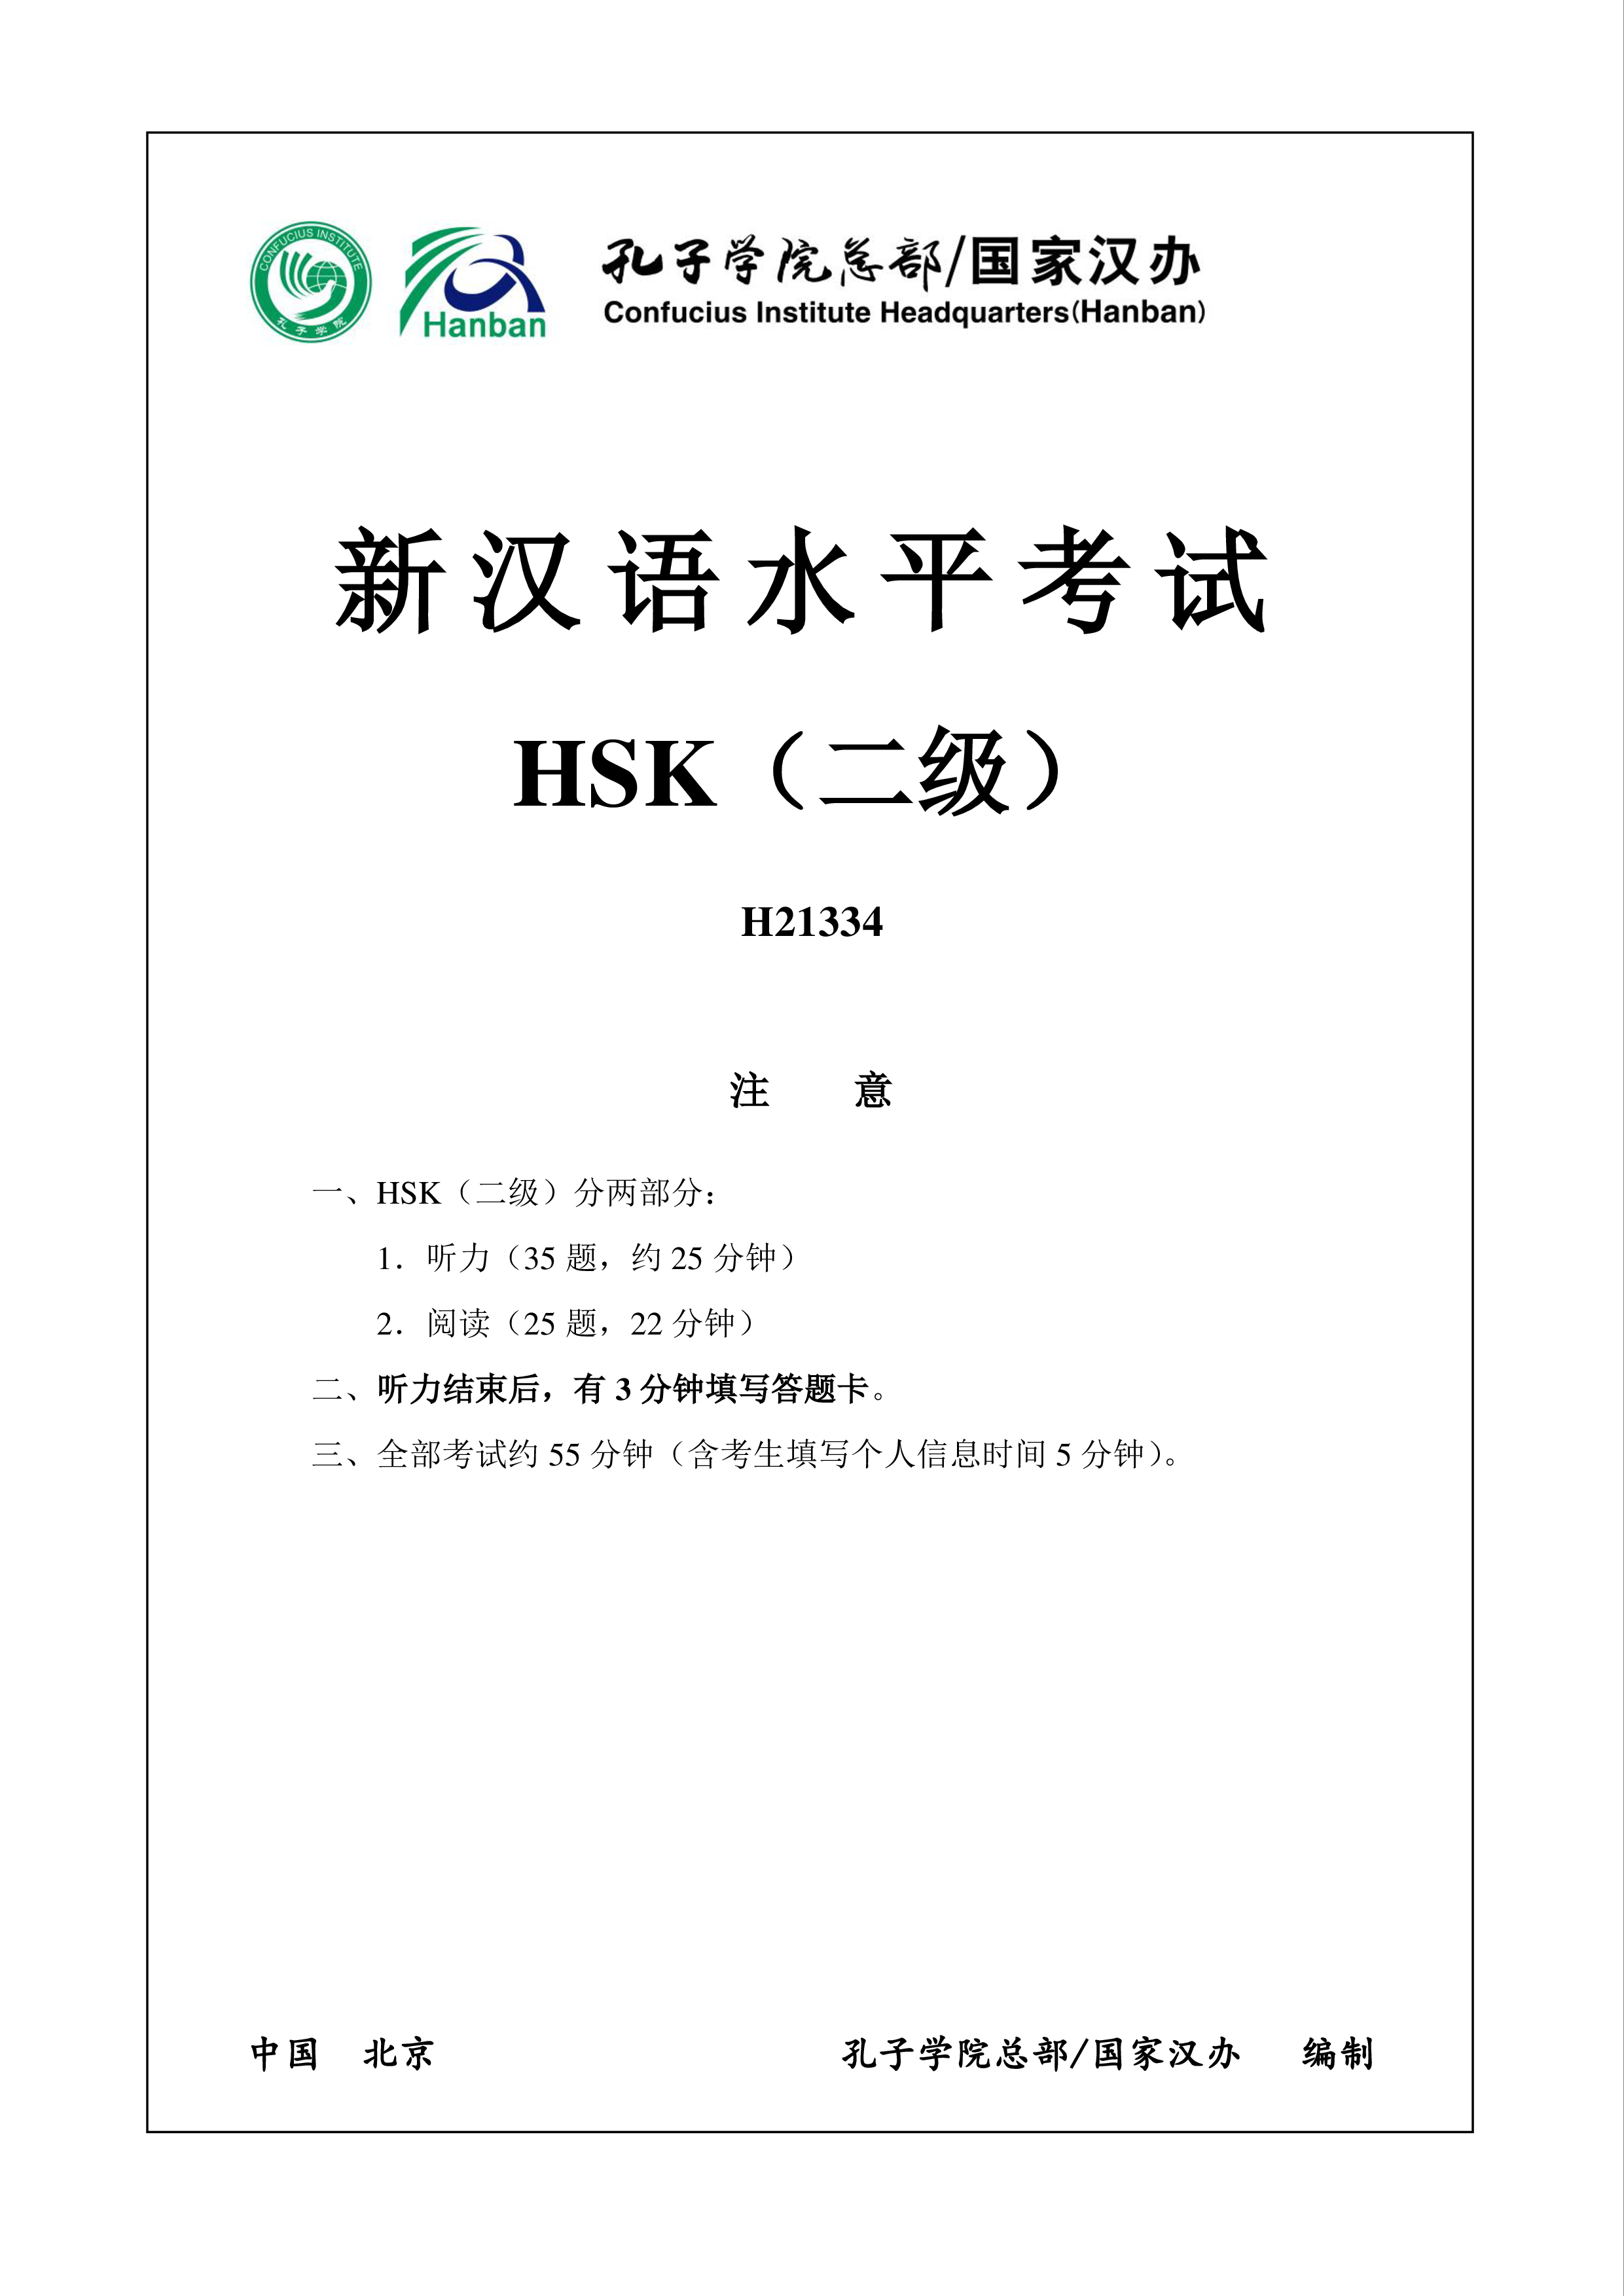 HSK2 Chinese Exam including Answers # HSK2 H21334 main image